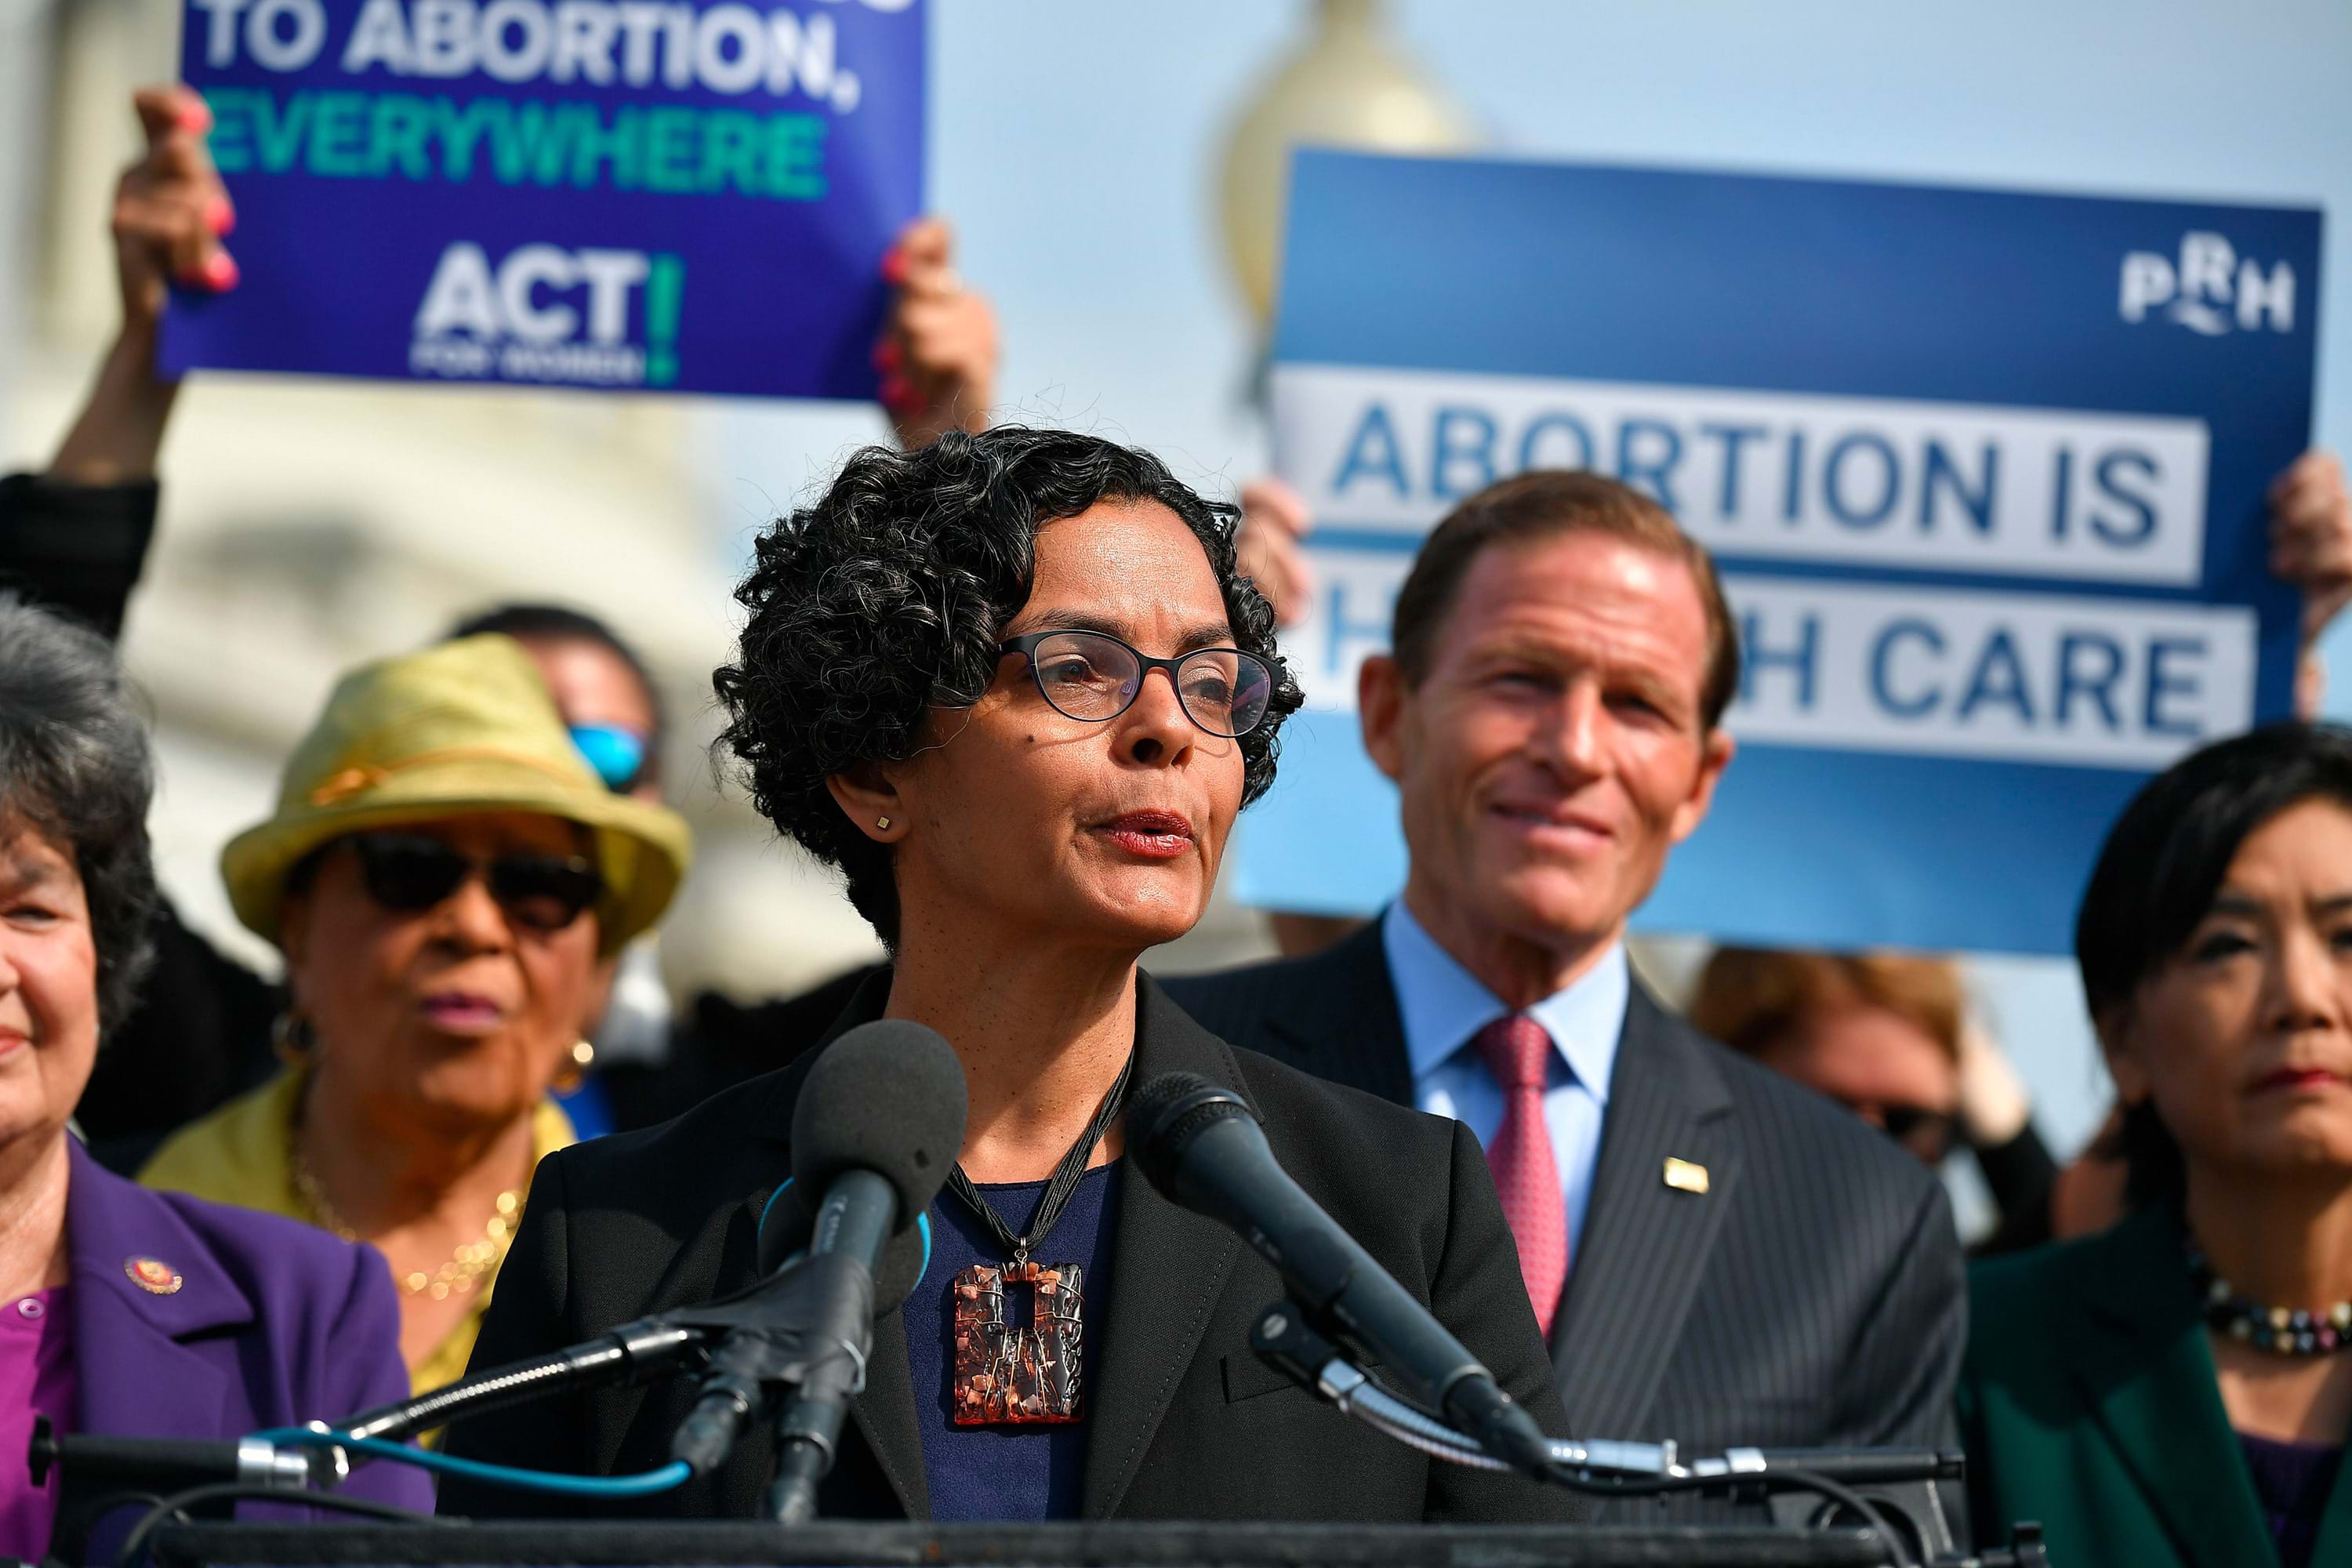 Lourdes Rivera speaks at a podium with people holding signs that read "Abortion is Health Care"